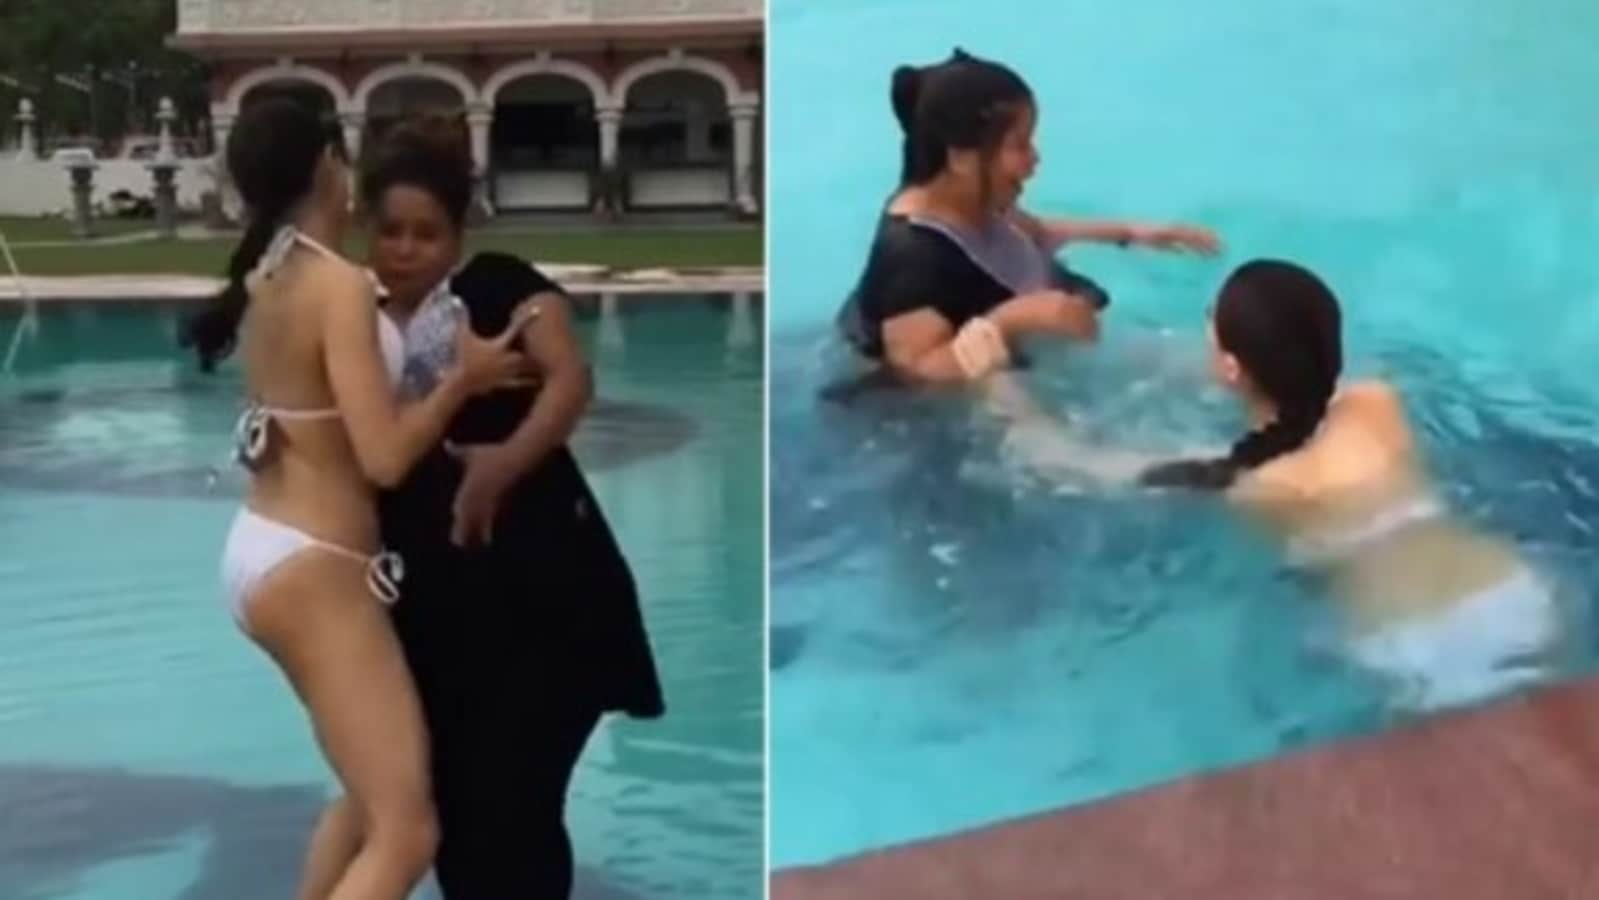 Open Saxe Video - Sara pushes spot girl into pool in 'worst prank' video, people say 'not  funny' | Bollywood - Hindustan Times